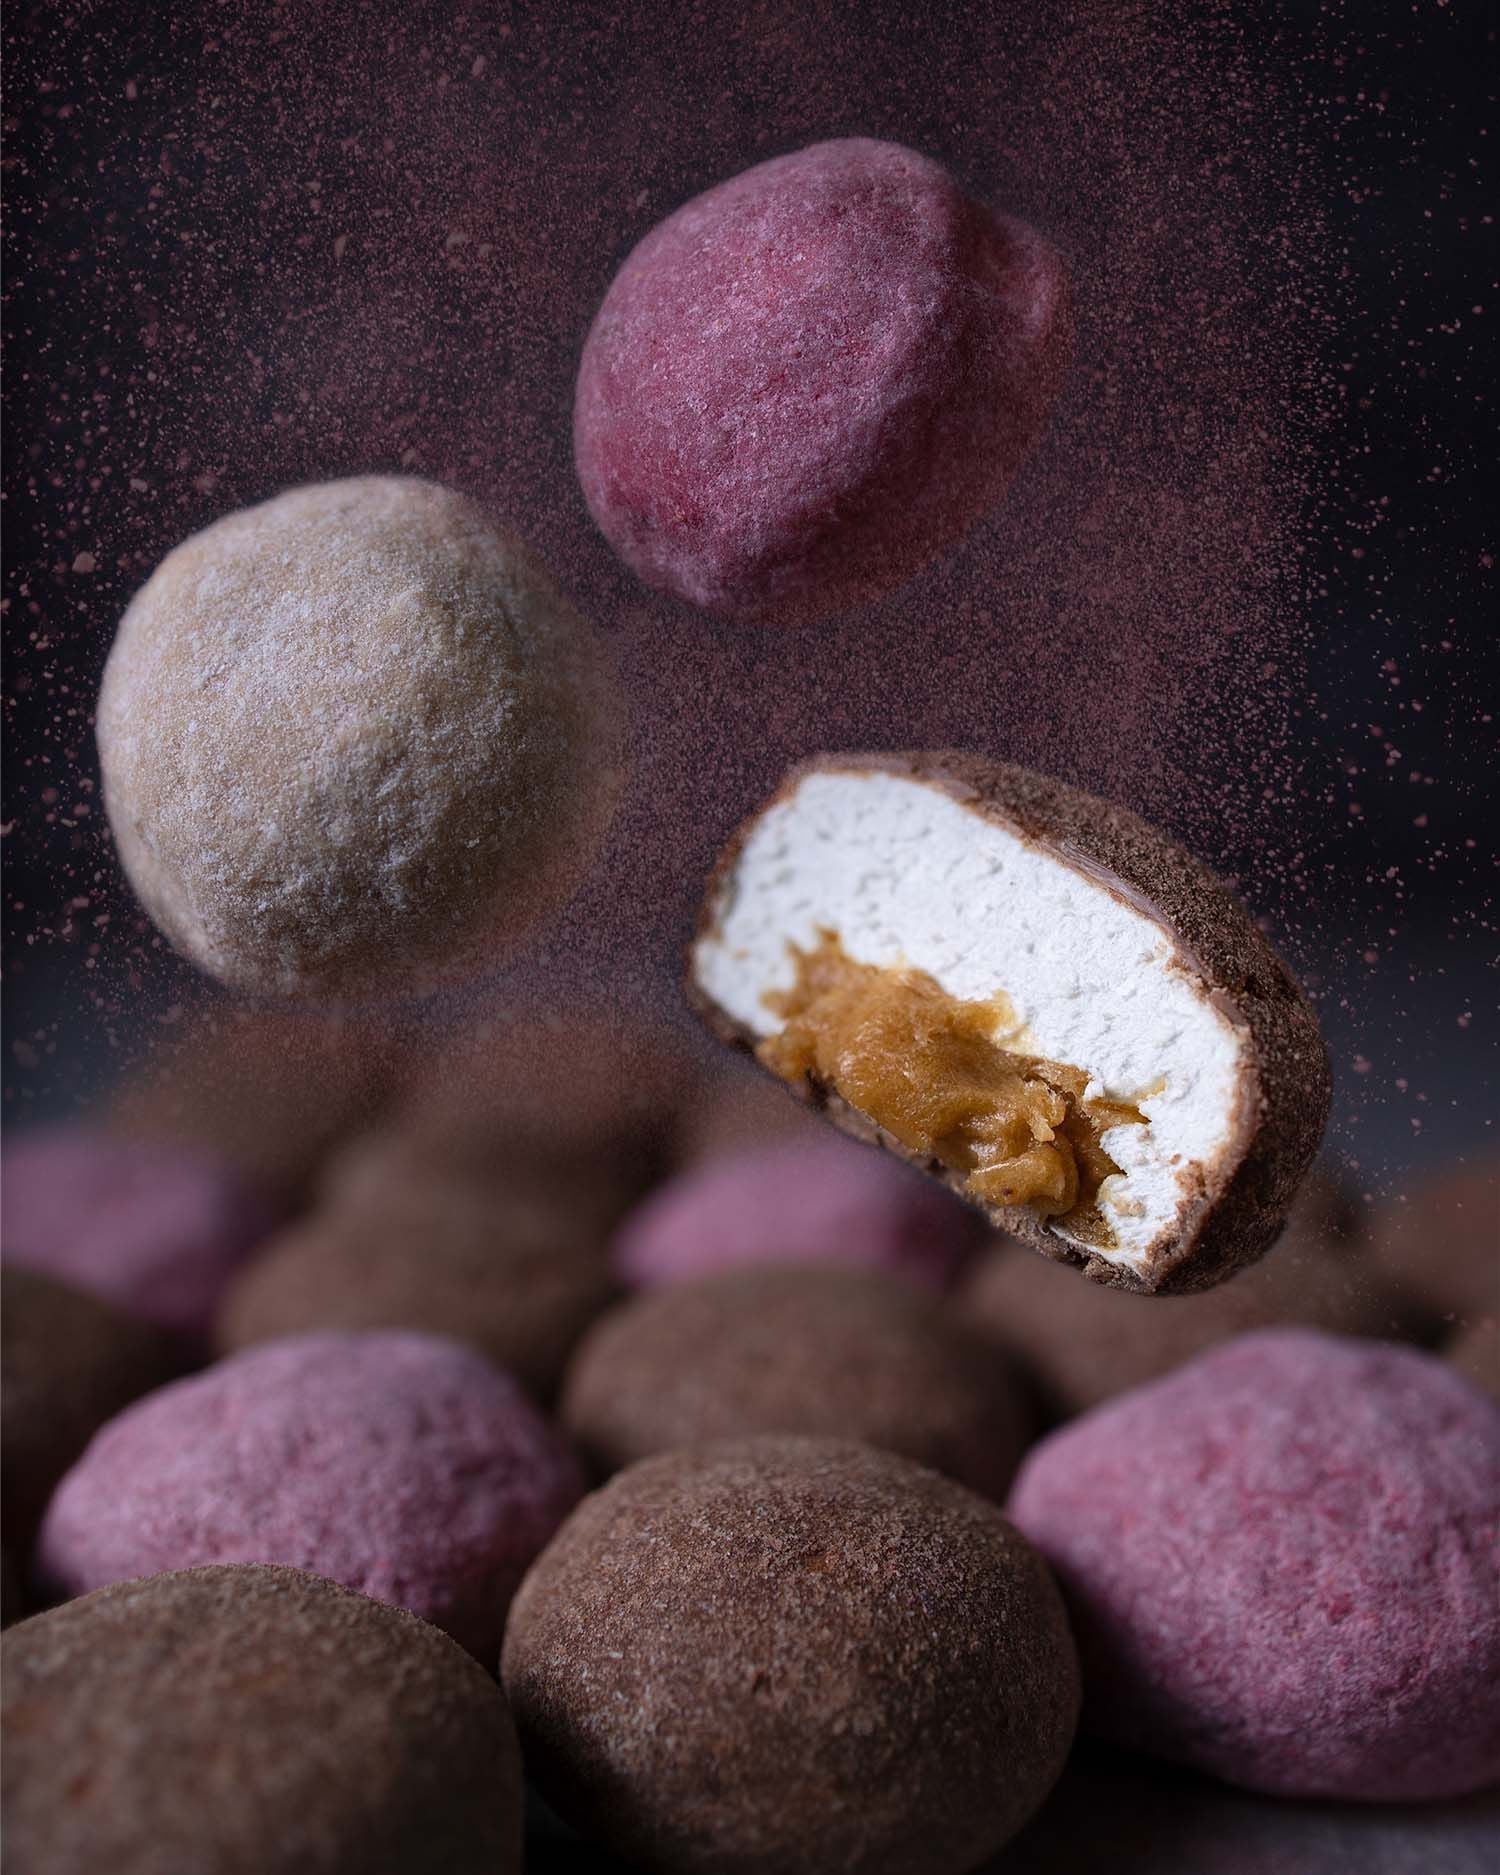 The Mallows Marshmallows With Caramel Filling & Chocolate Ruby Chocolate, 90g